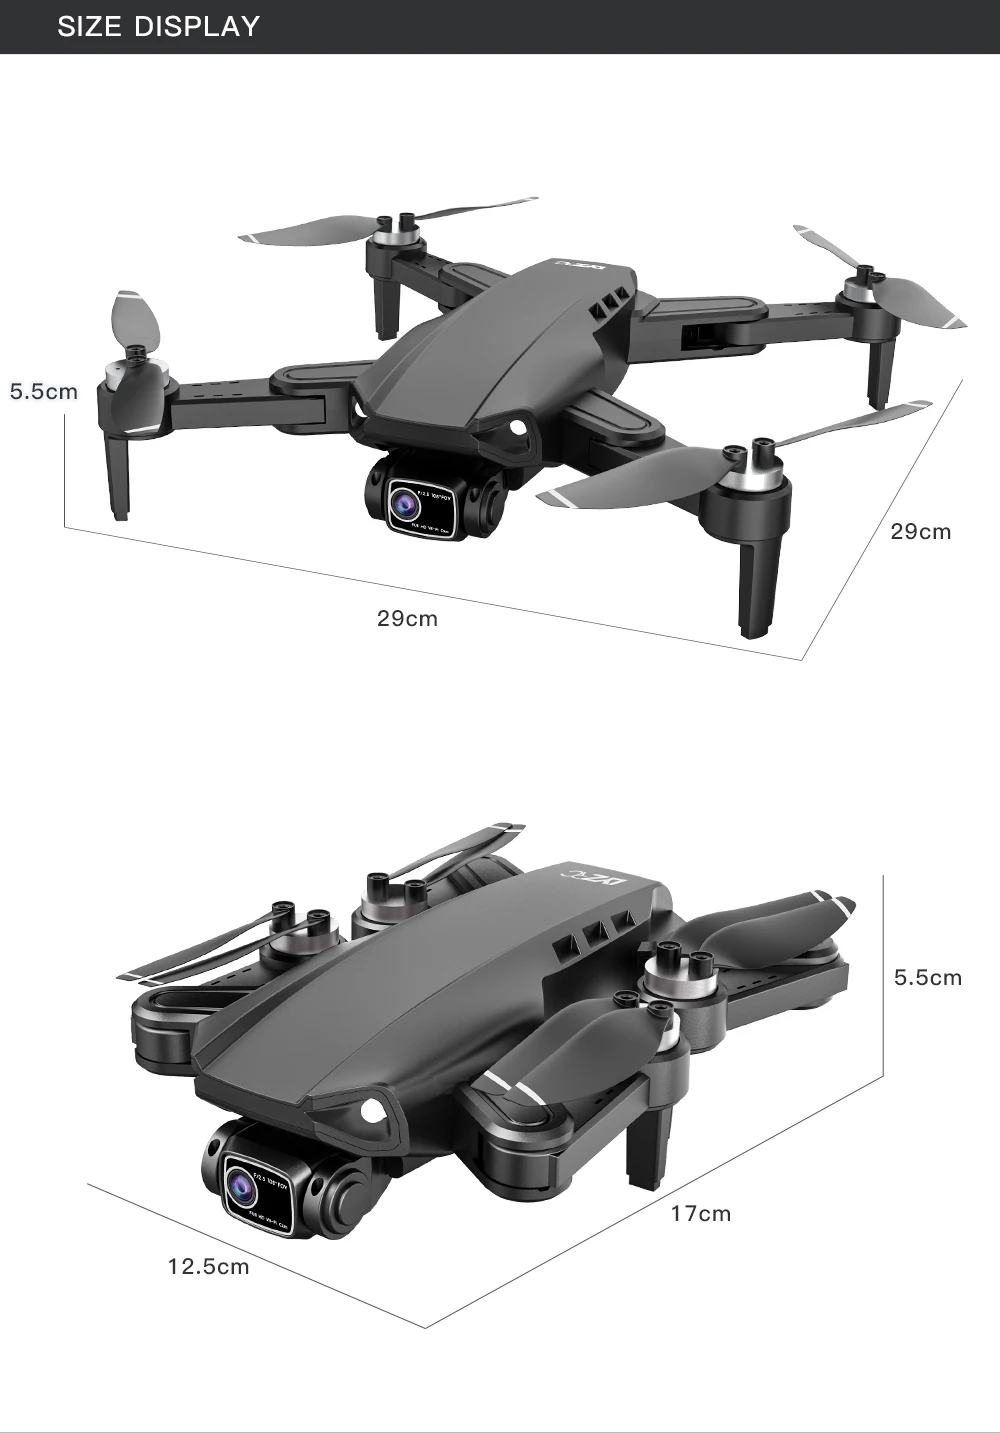 deerc drone L900 PRO Upgraded GPS Drone 4K Camera FPV Quadcopter Brushless 5G 1.2KM Flight RC Helicopter HD Camera Drone 220g sony drone